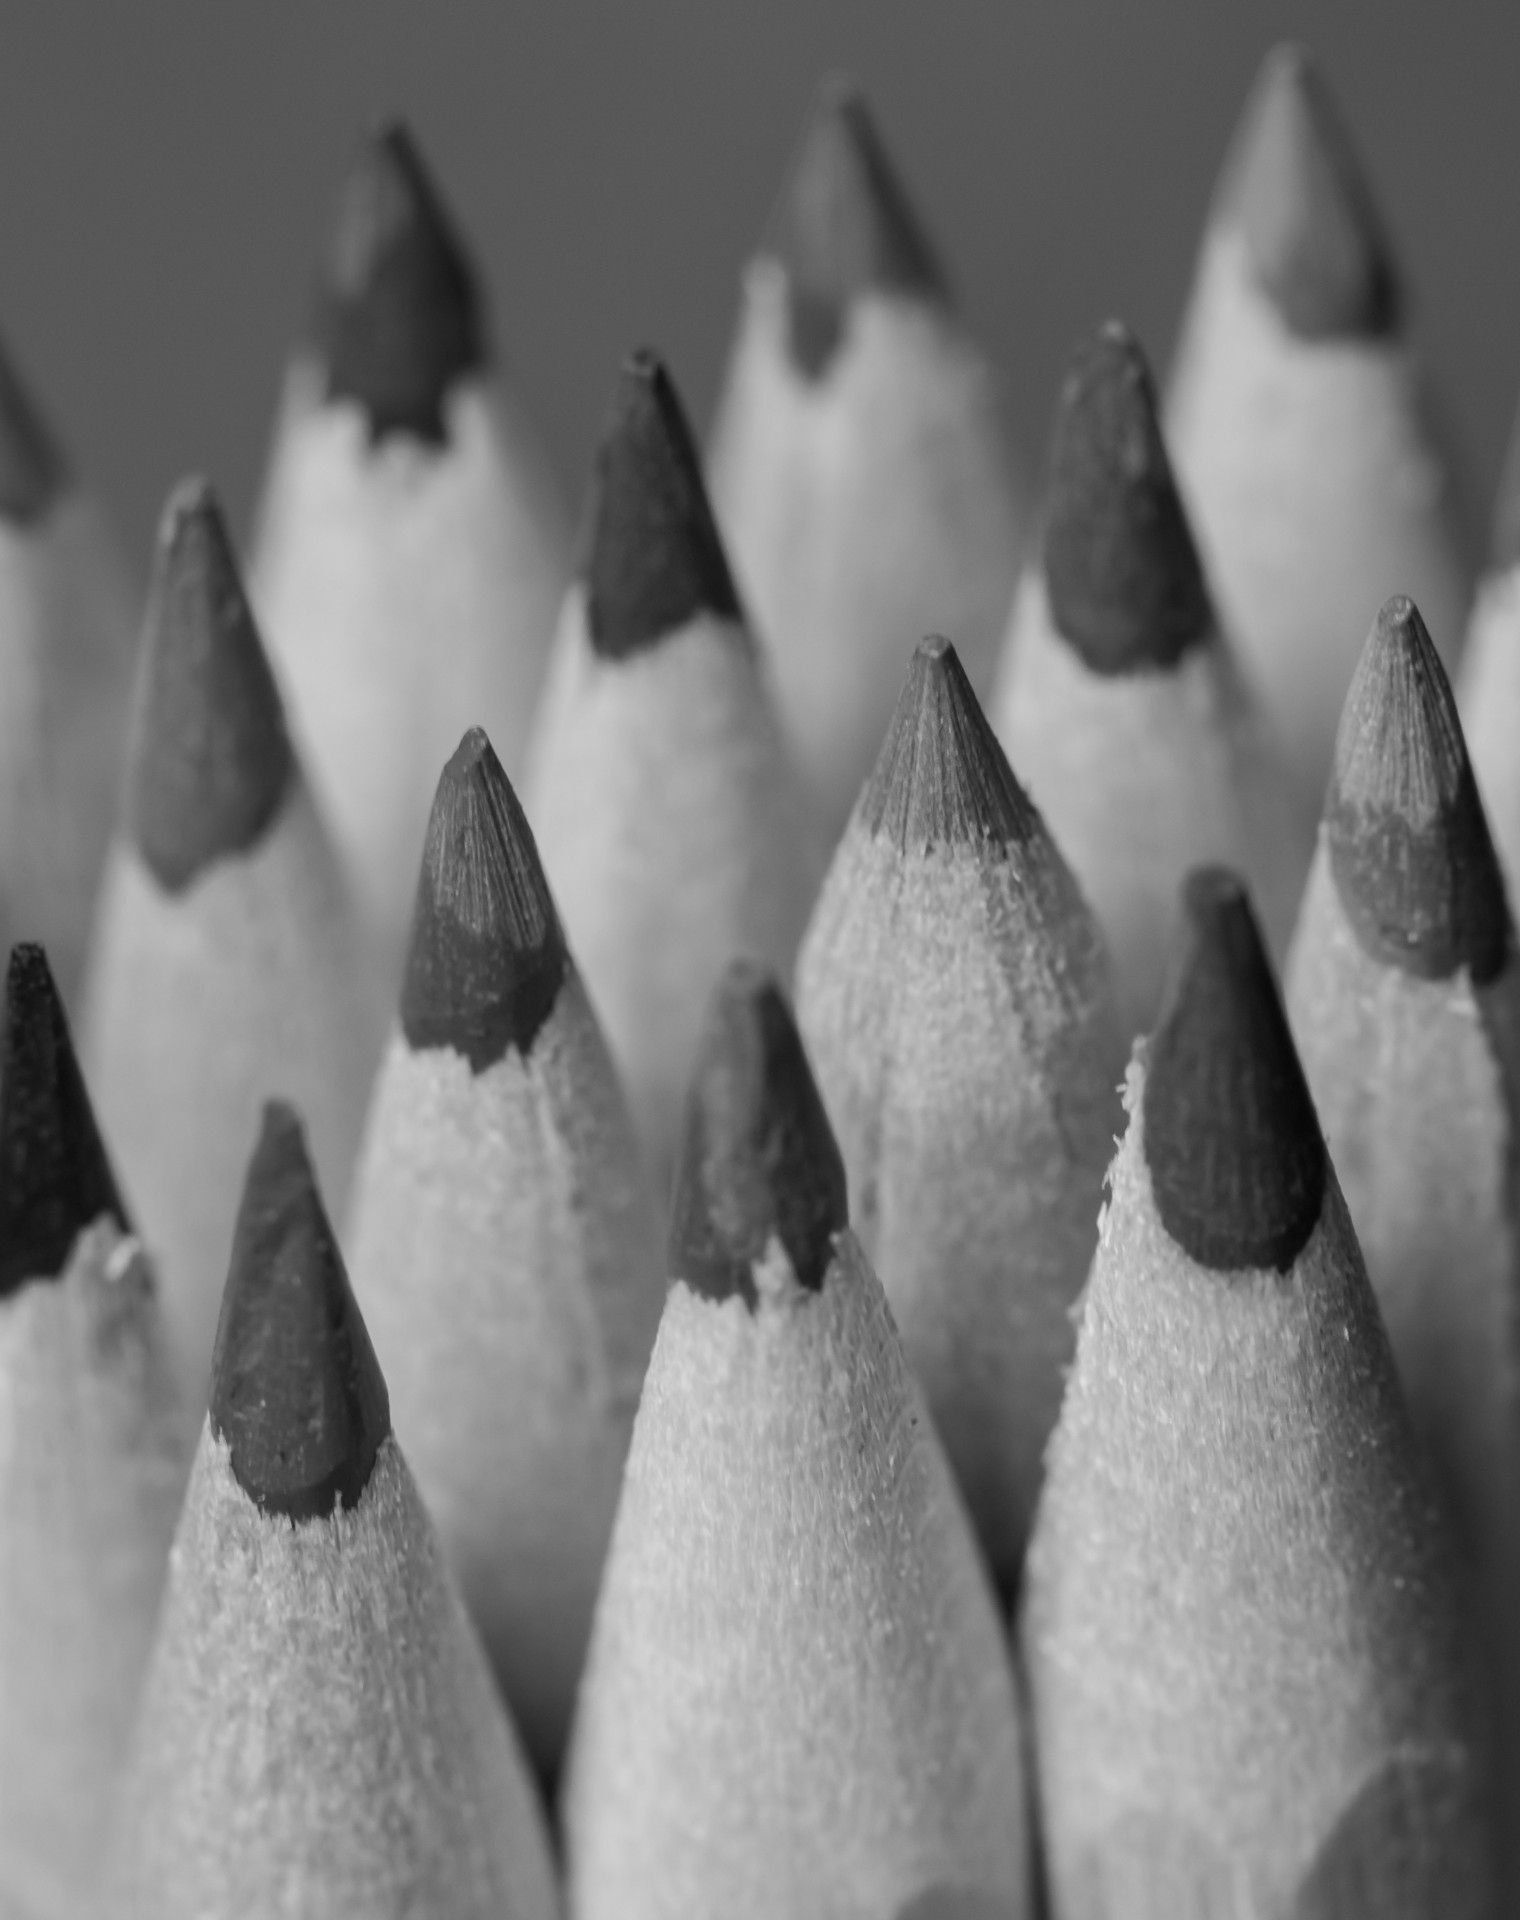 Sharpened Pencils - Black And White